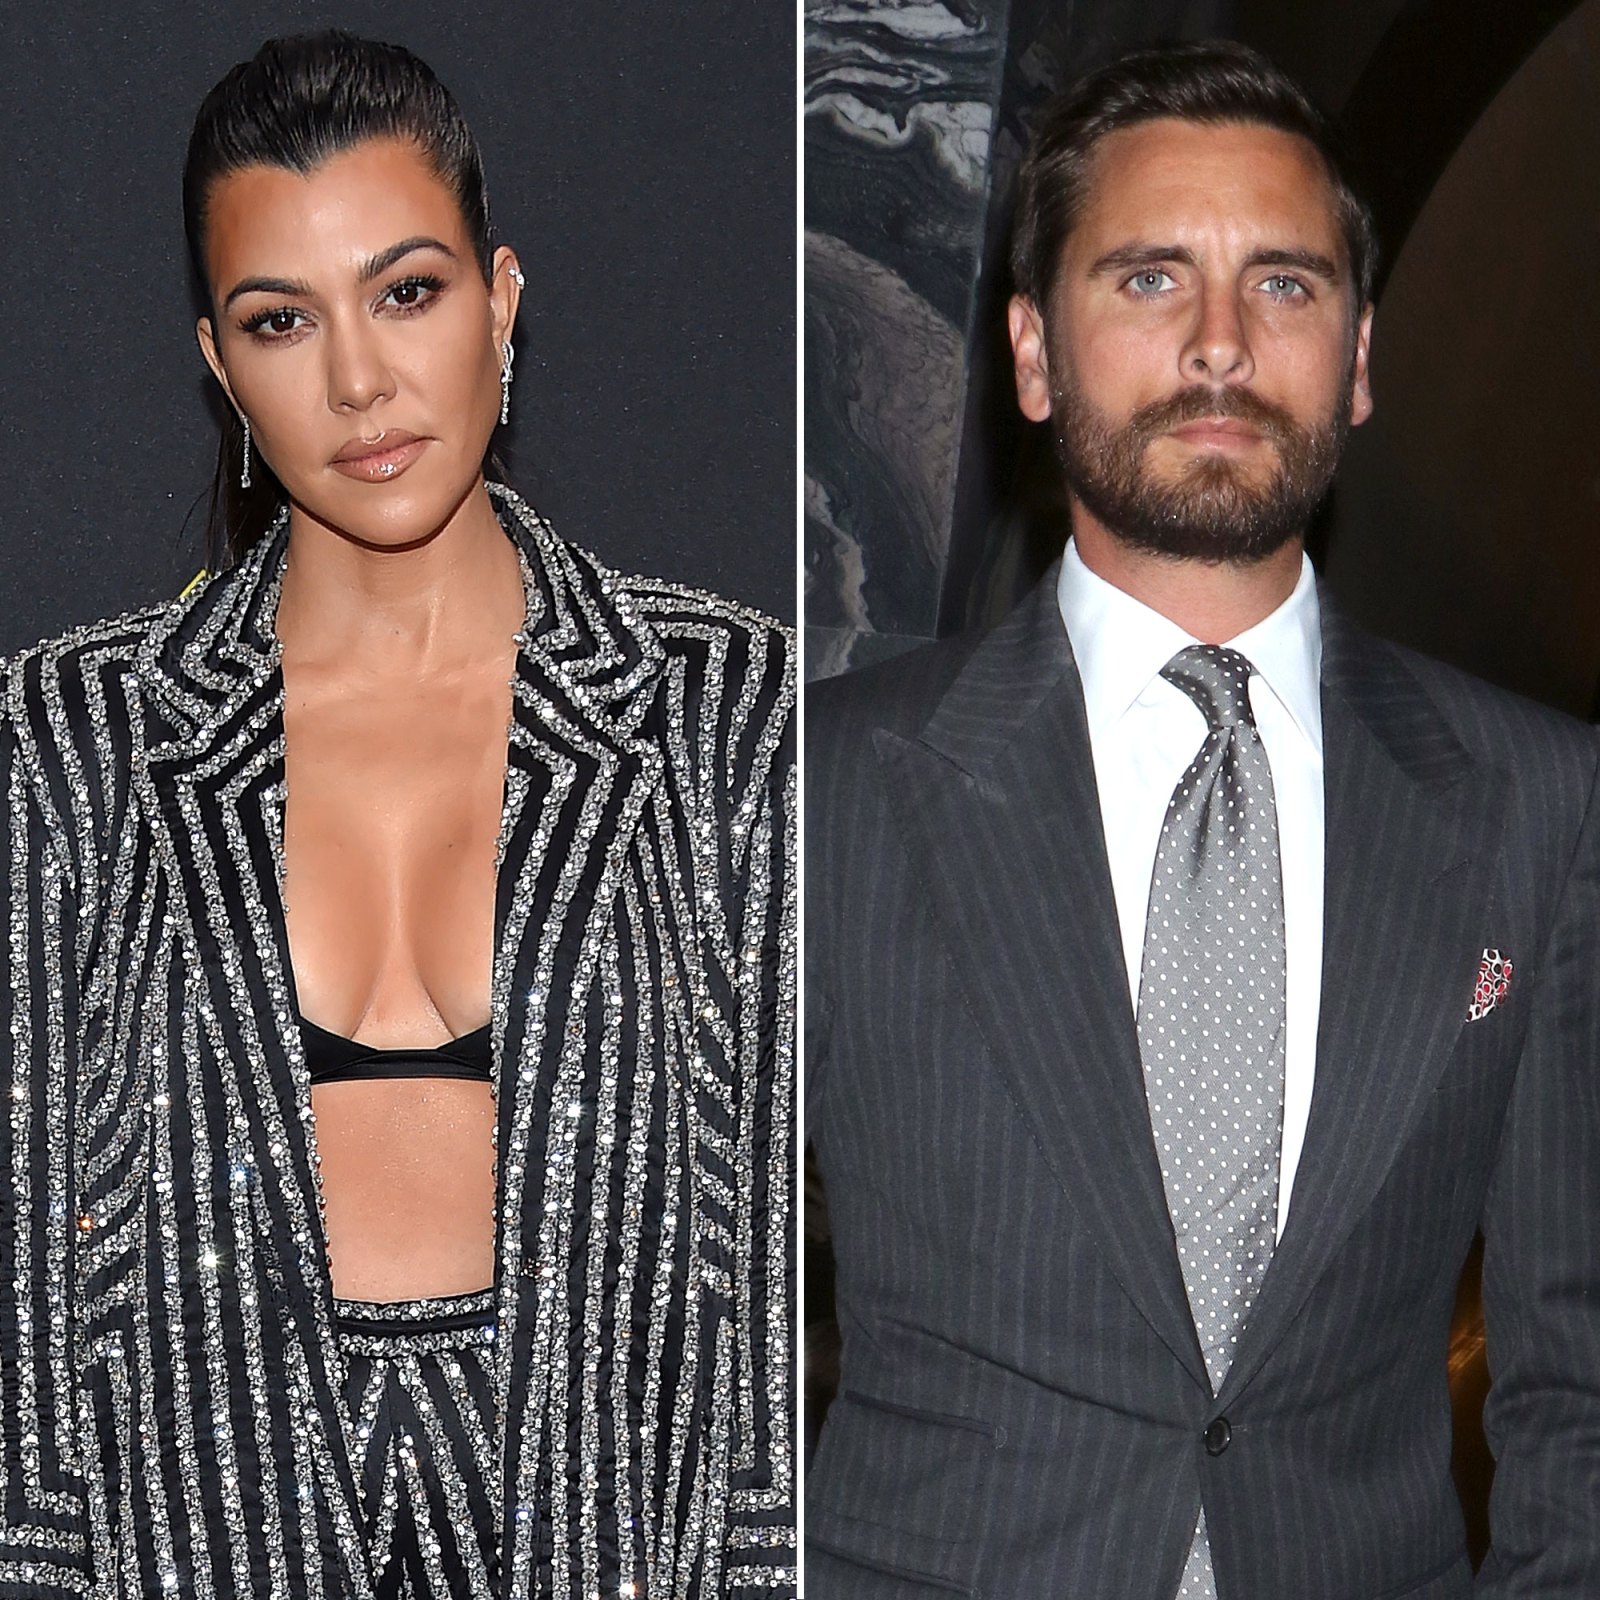 Did Scott Disick Just Reveal the Real Reason Behind His 